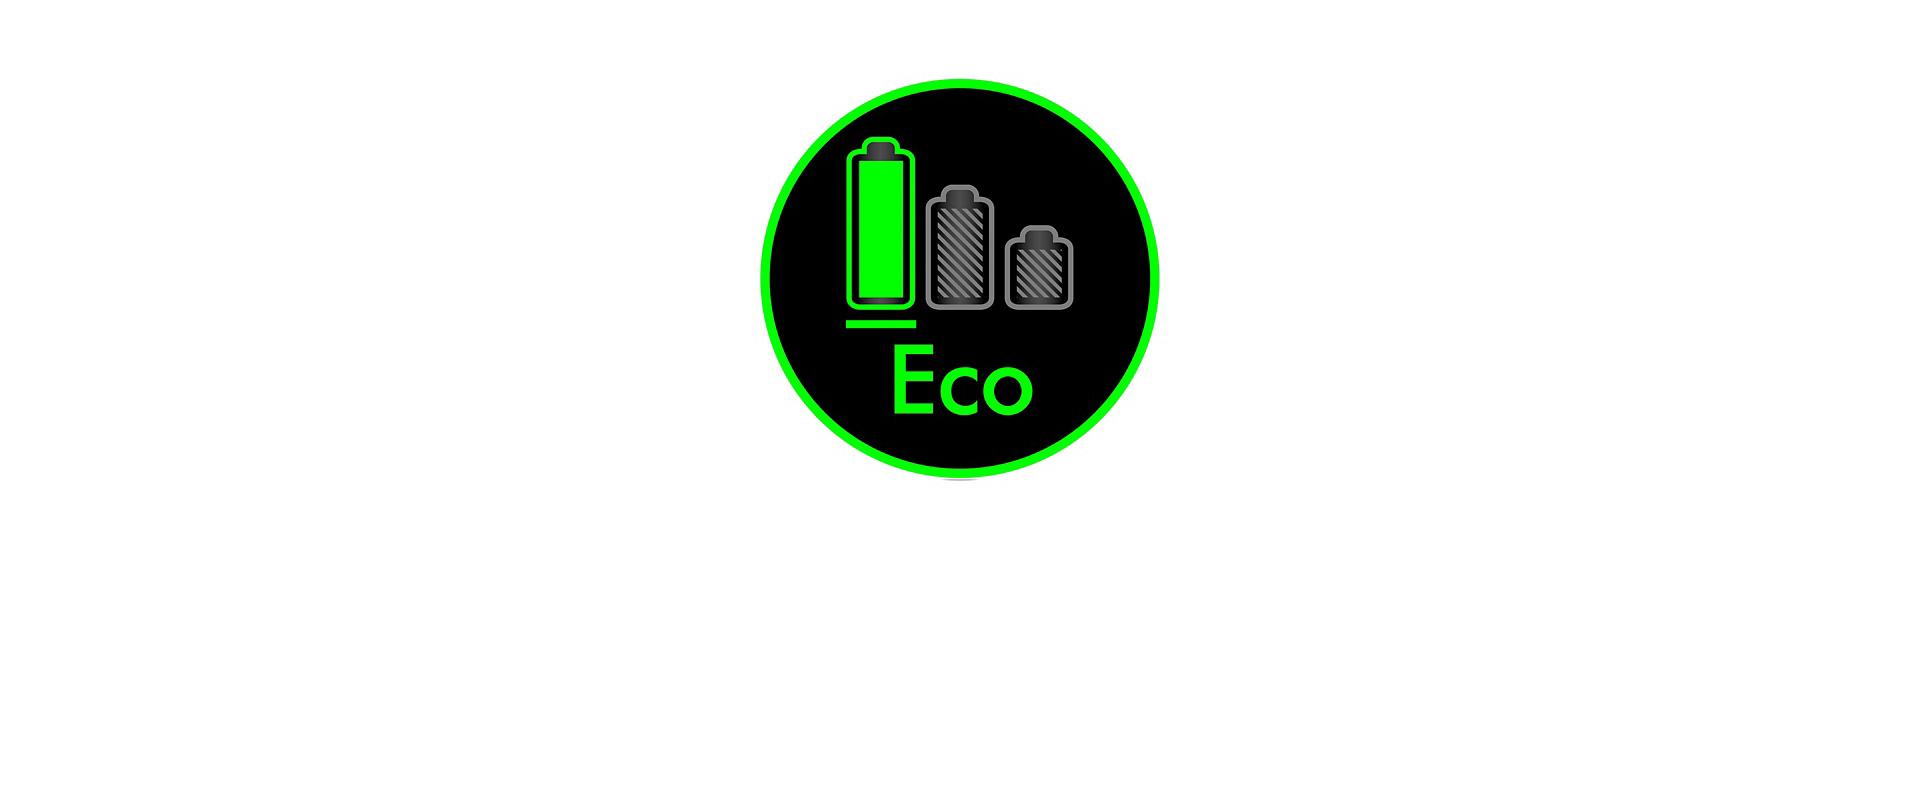 The green Eco mode indicator.